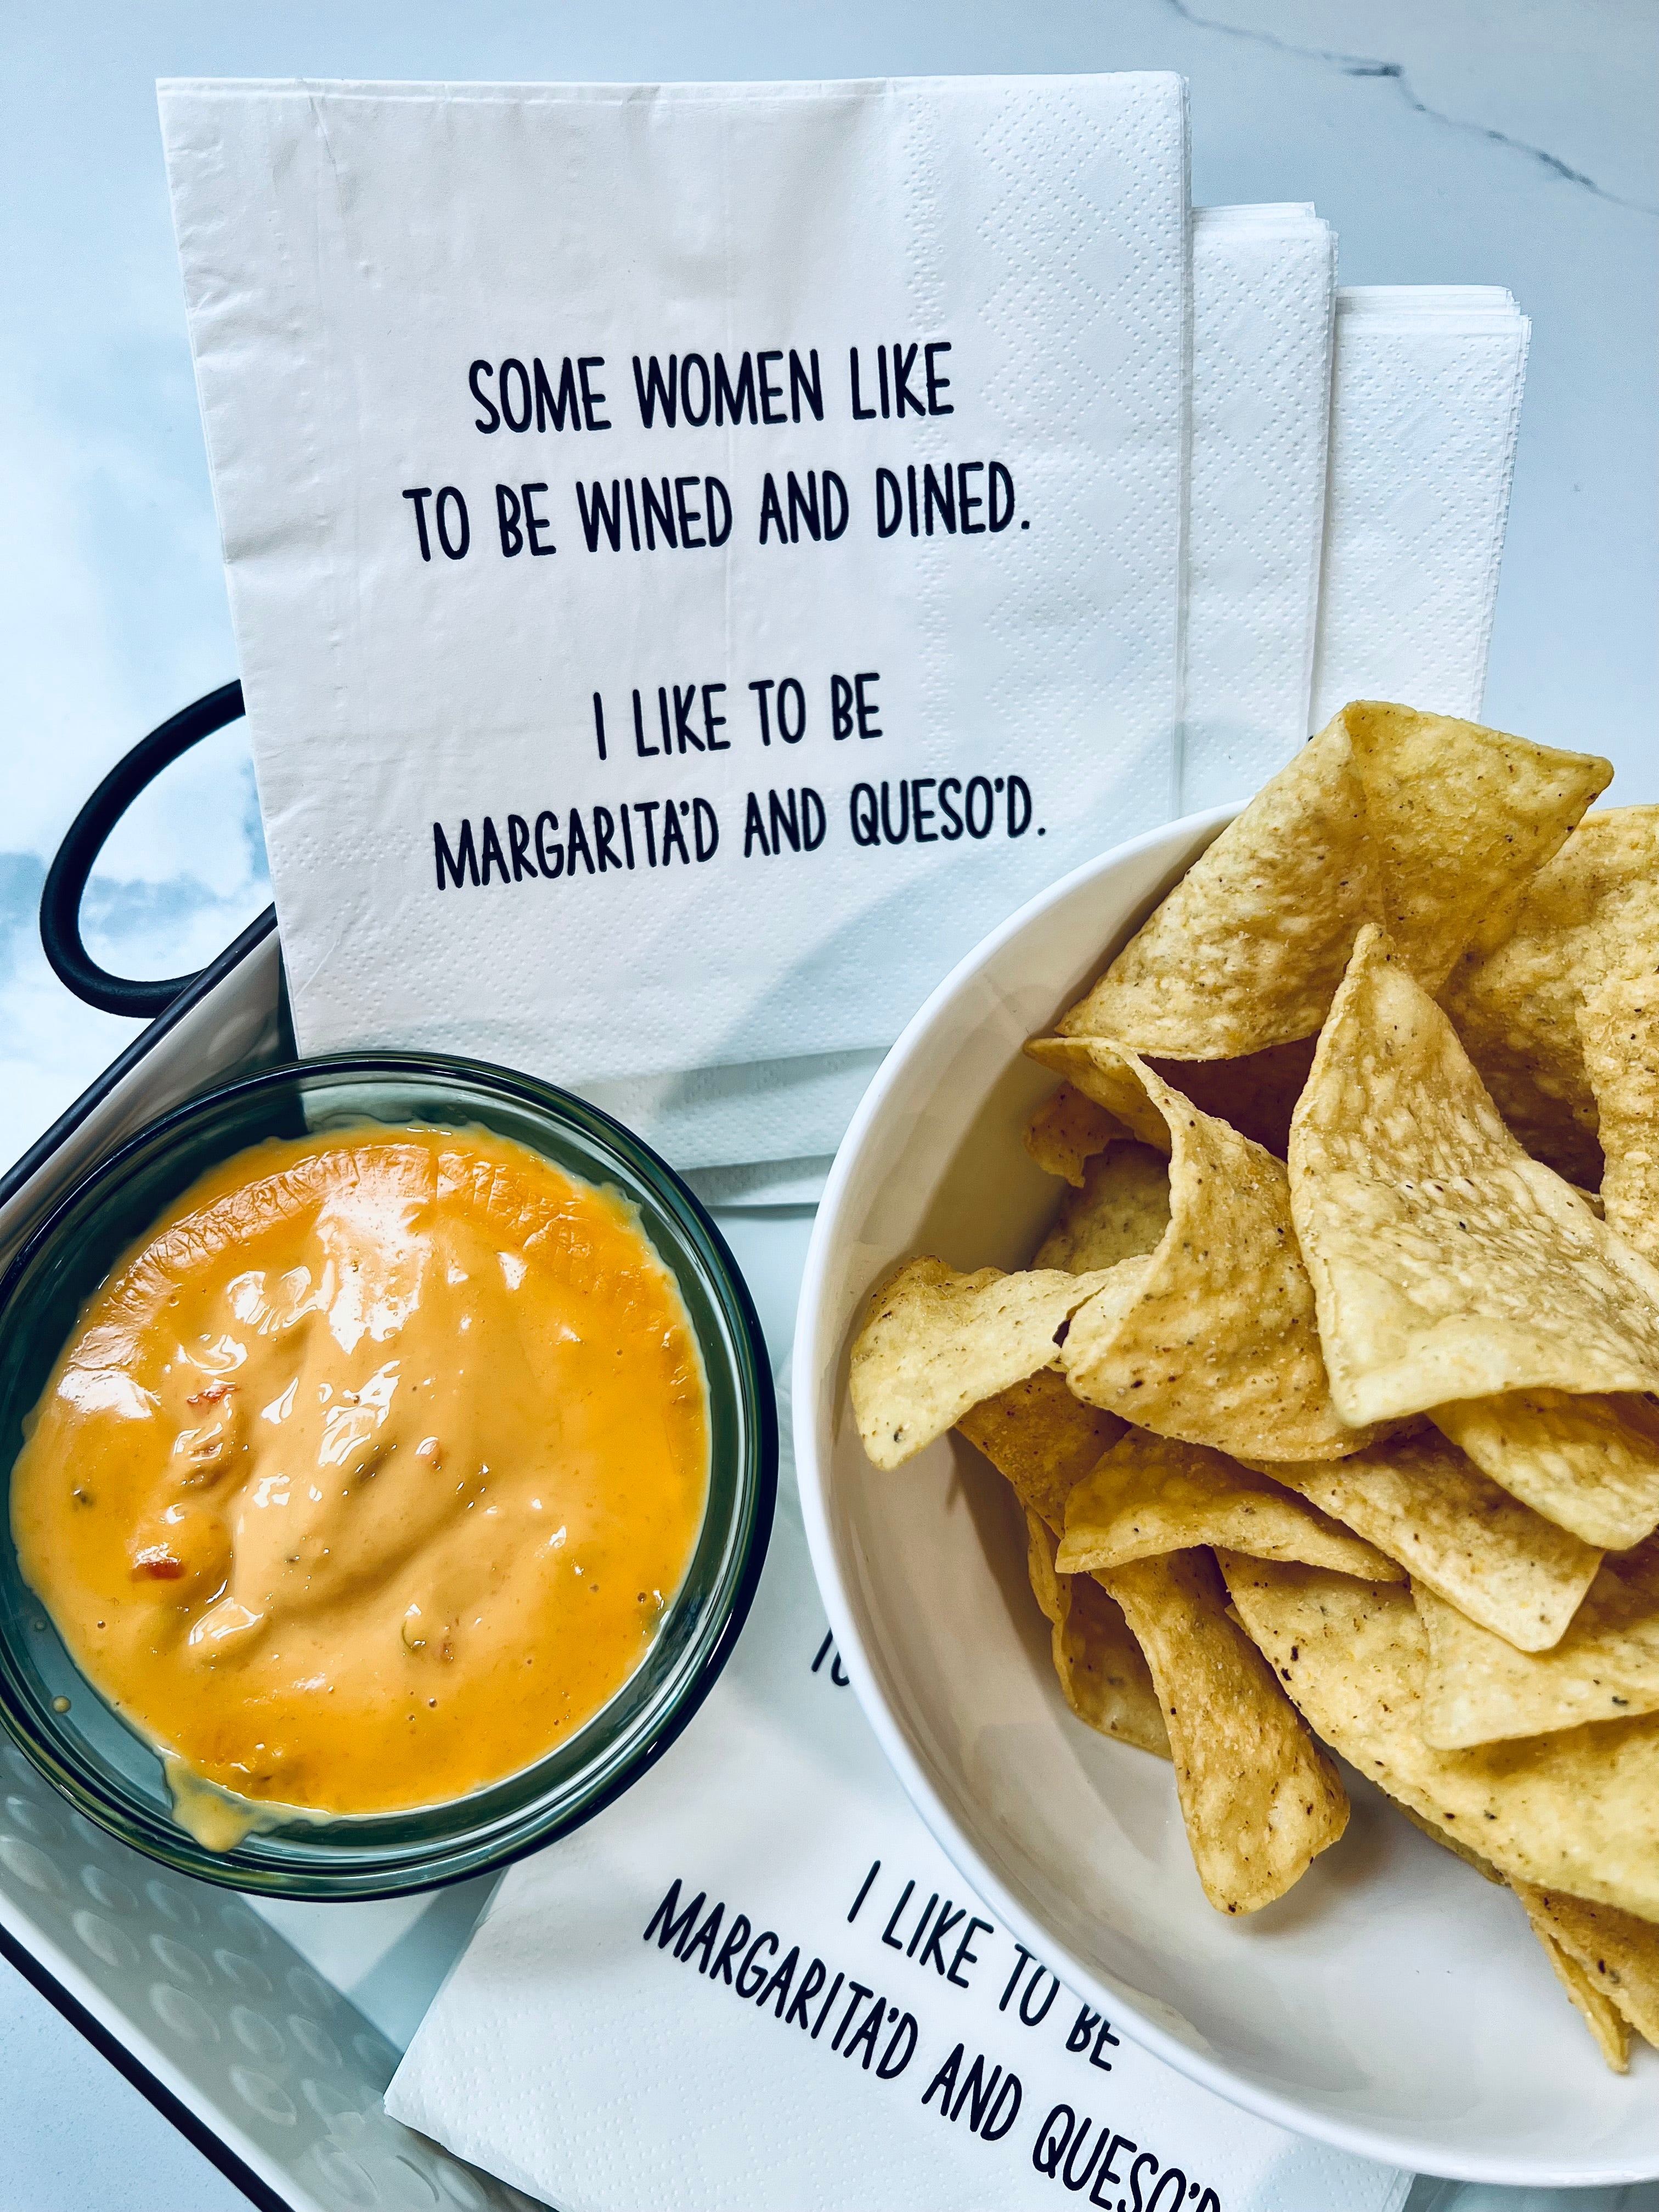 Some women like to be wined and dined. I like to be margarita'd and queso'd. Cocktail Napkins